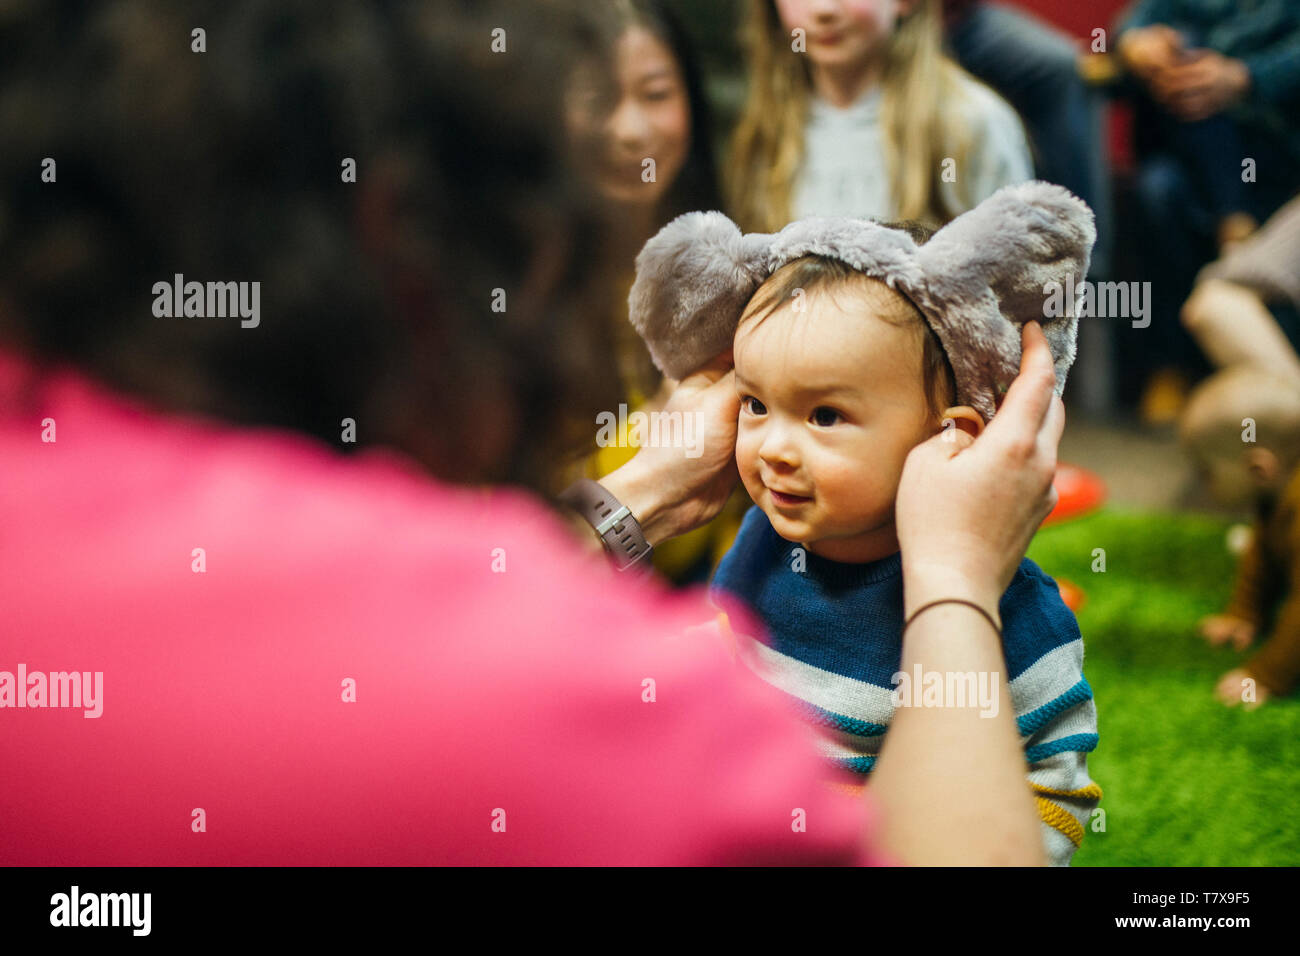 Little boy is playing with his mother in a preschool group. She is putting a headpiece on him. Stock Photo